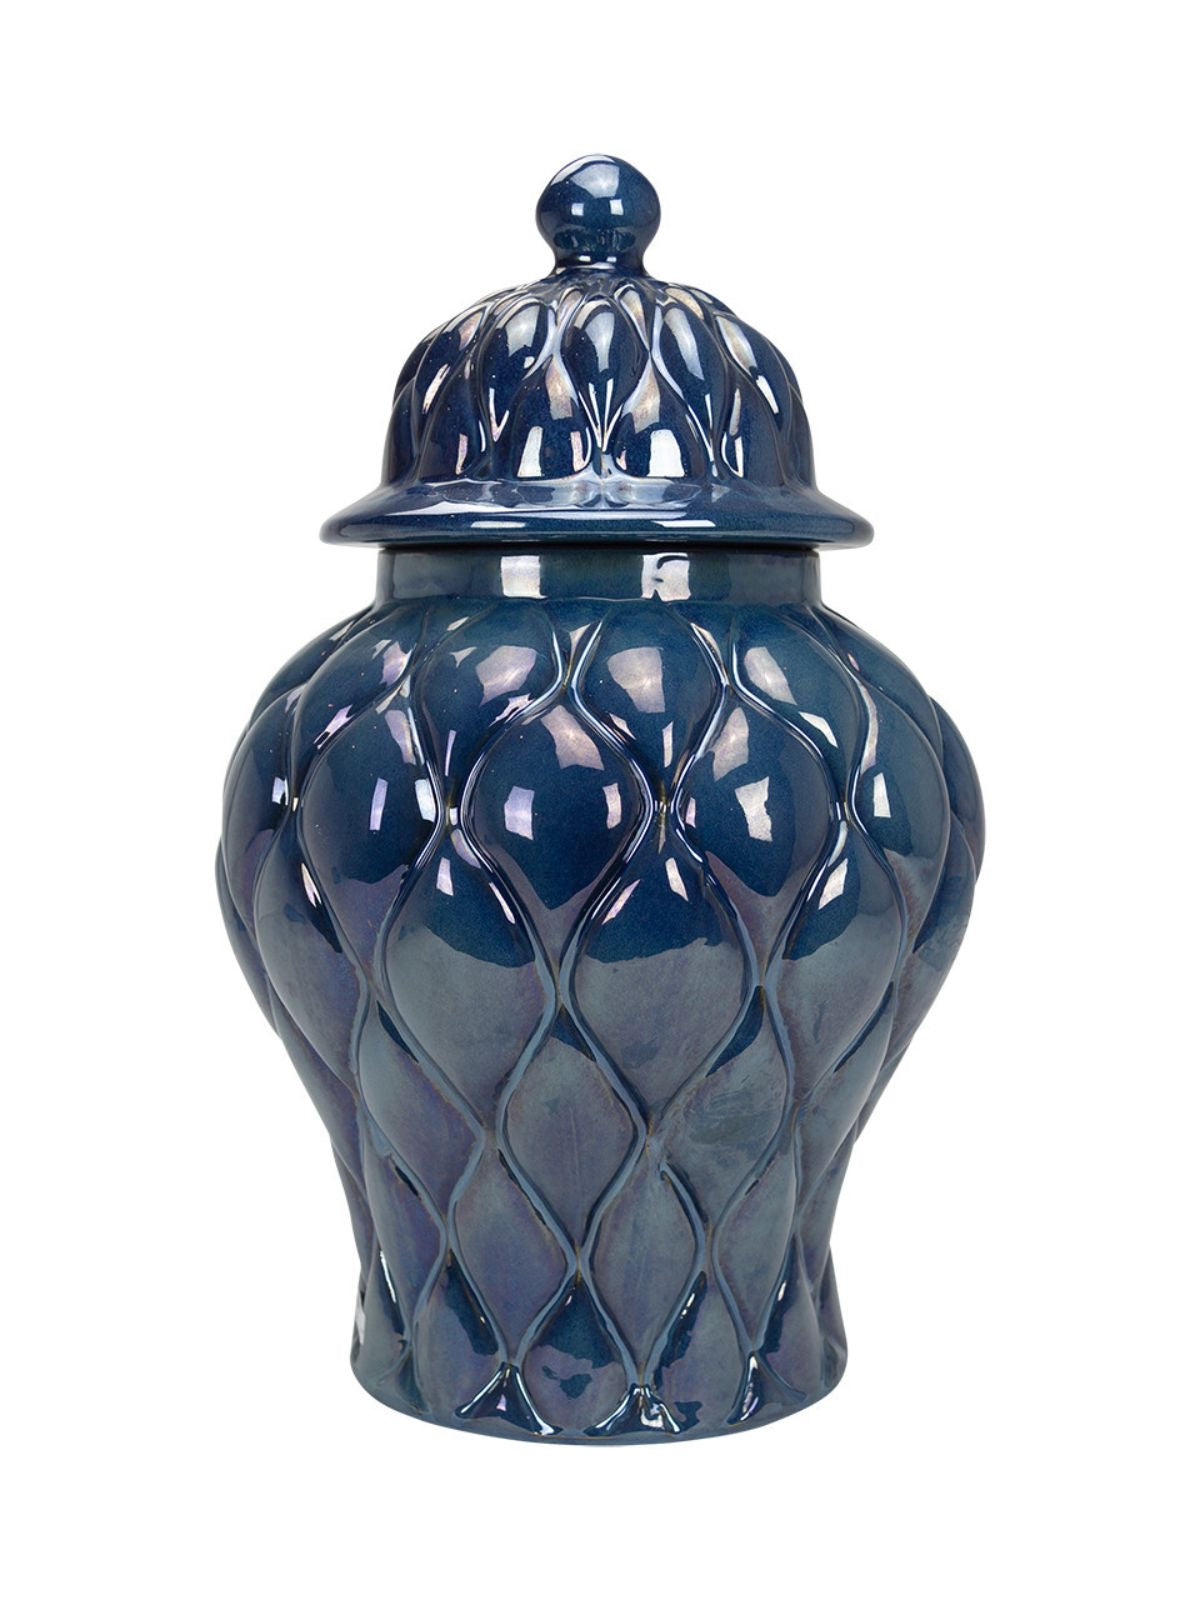 Sapphire Blue Ceramic Ginger Jar with Quilt Pattern And Lid in Size Short, Sold KYA Home Decor.